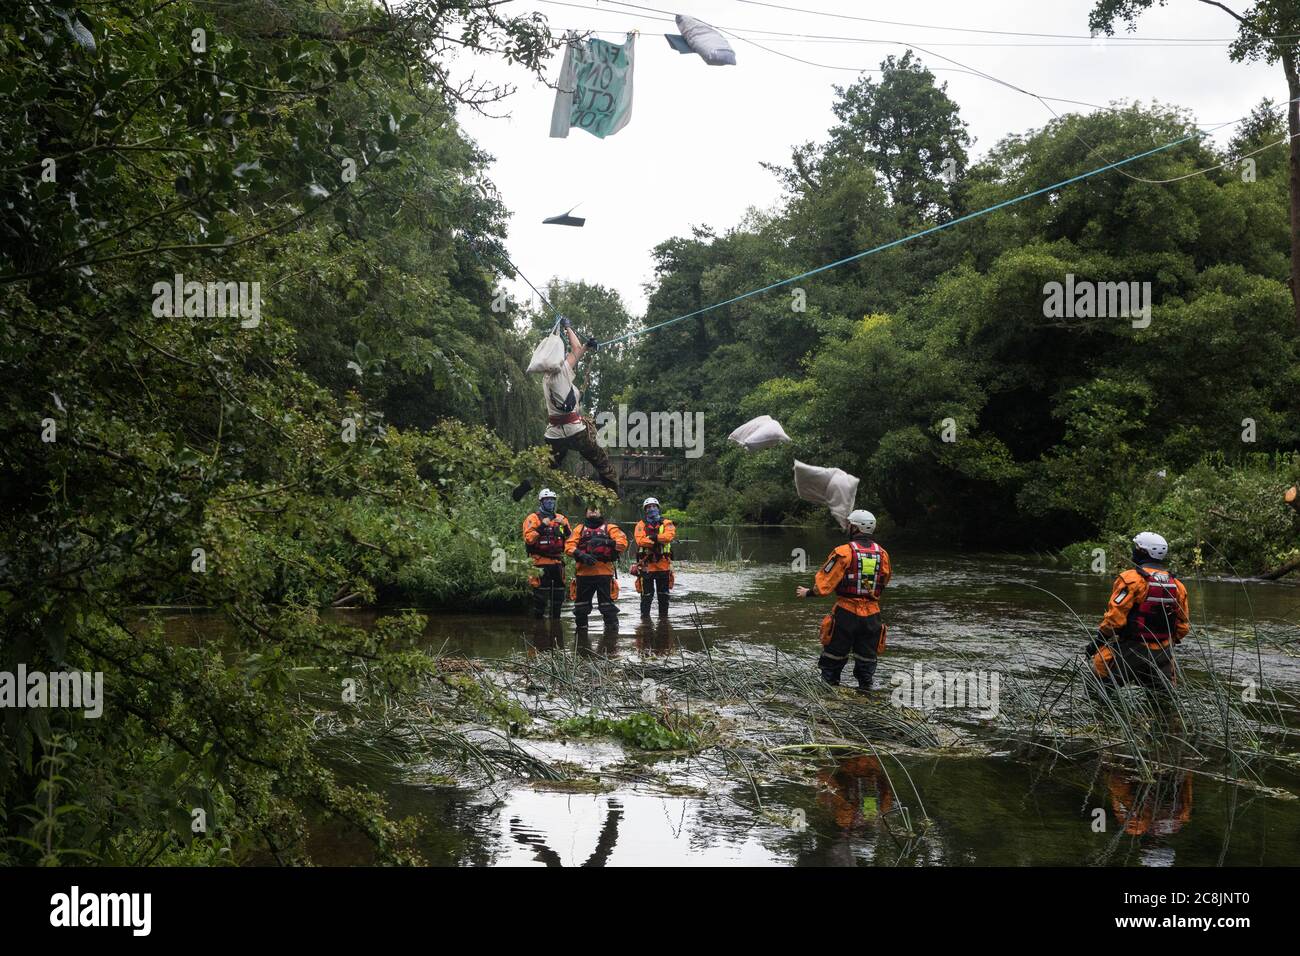 Denham, UK. 24 July, 2020. Swan, an environmental activist from HS2 Rebellion, and her possessions fall suddenly as her safety line above the shallow river Colne is released by police officers from an ancient alder tree to which she had been attached for almost fourteen hours in an attempt to protect it from destruction during works for the HS2 high-speed rail link. Officers from Hampshire Police Marine Support Unit look on. An activist had been hospitalised when a safety line had been released in this way the previous day. Credit: Mark Kerrison/Alamy Live News Stock Photo